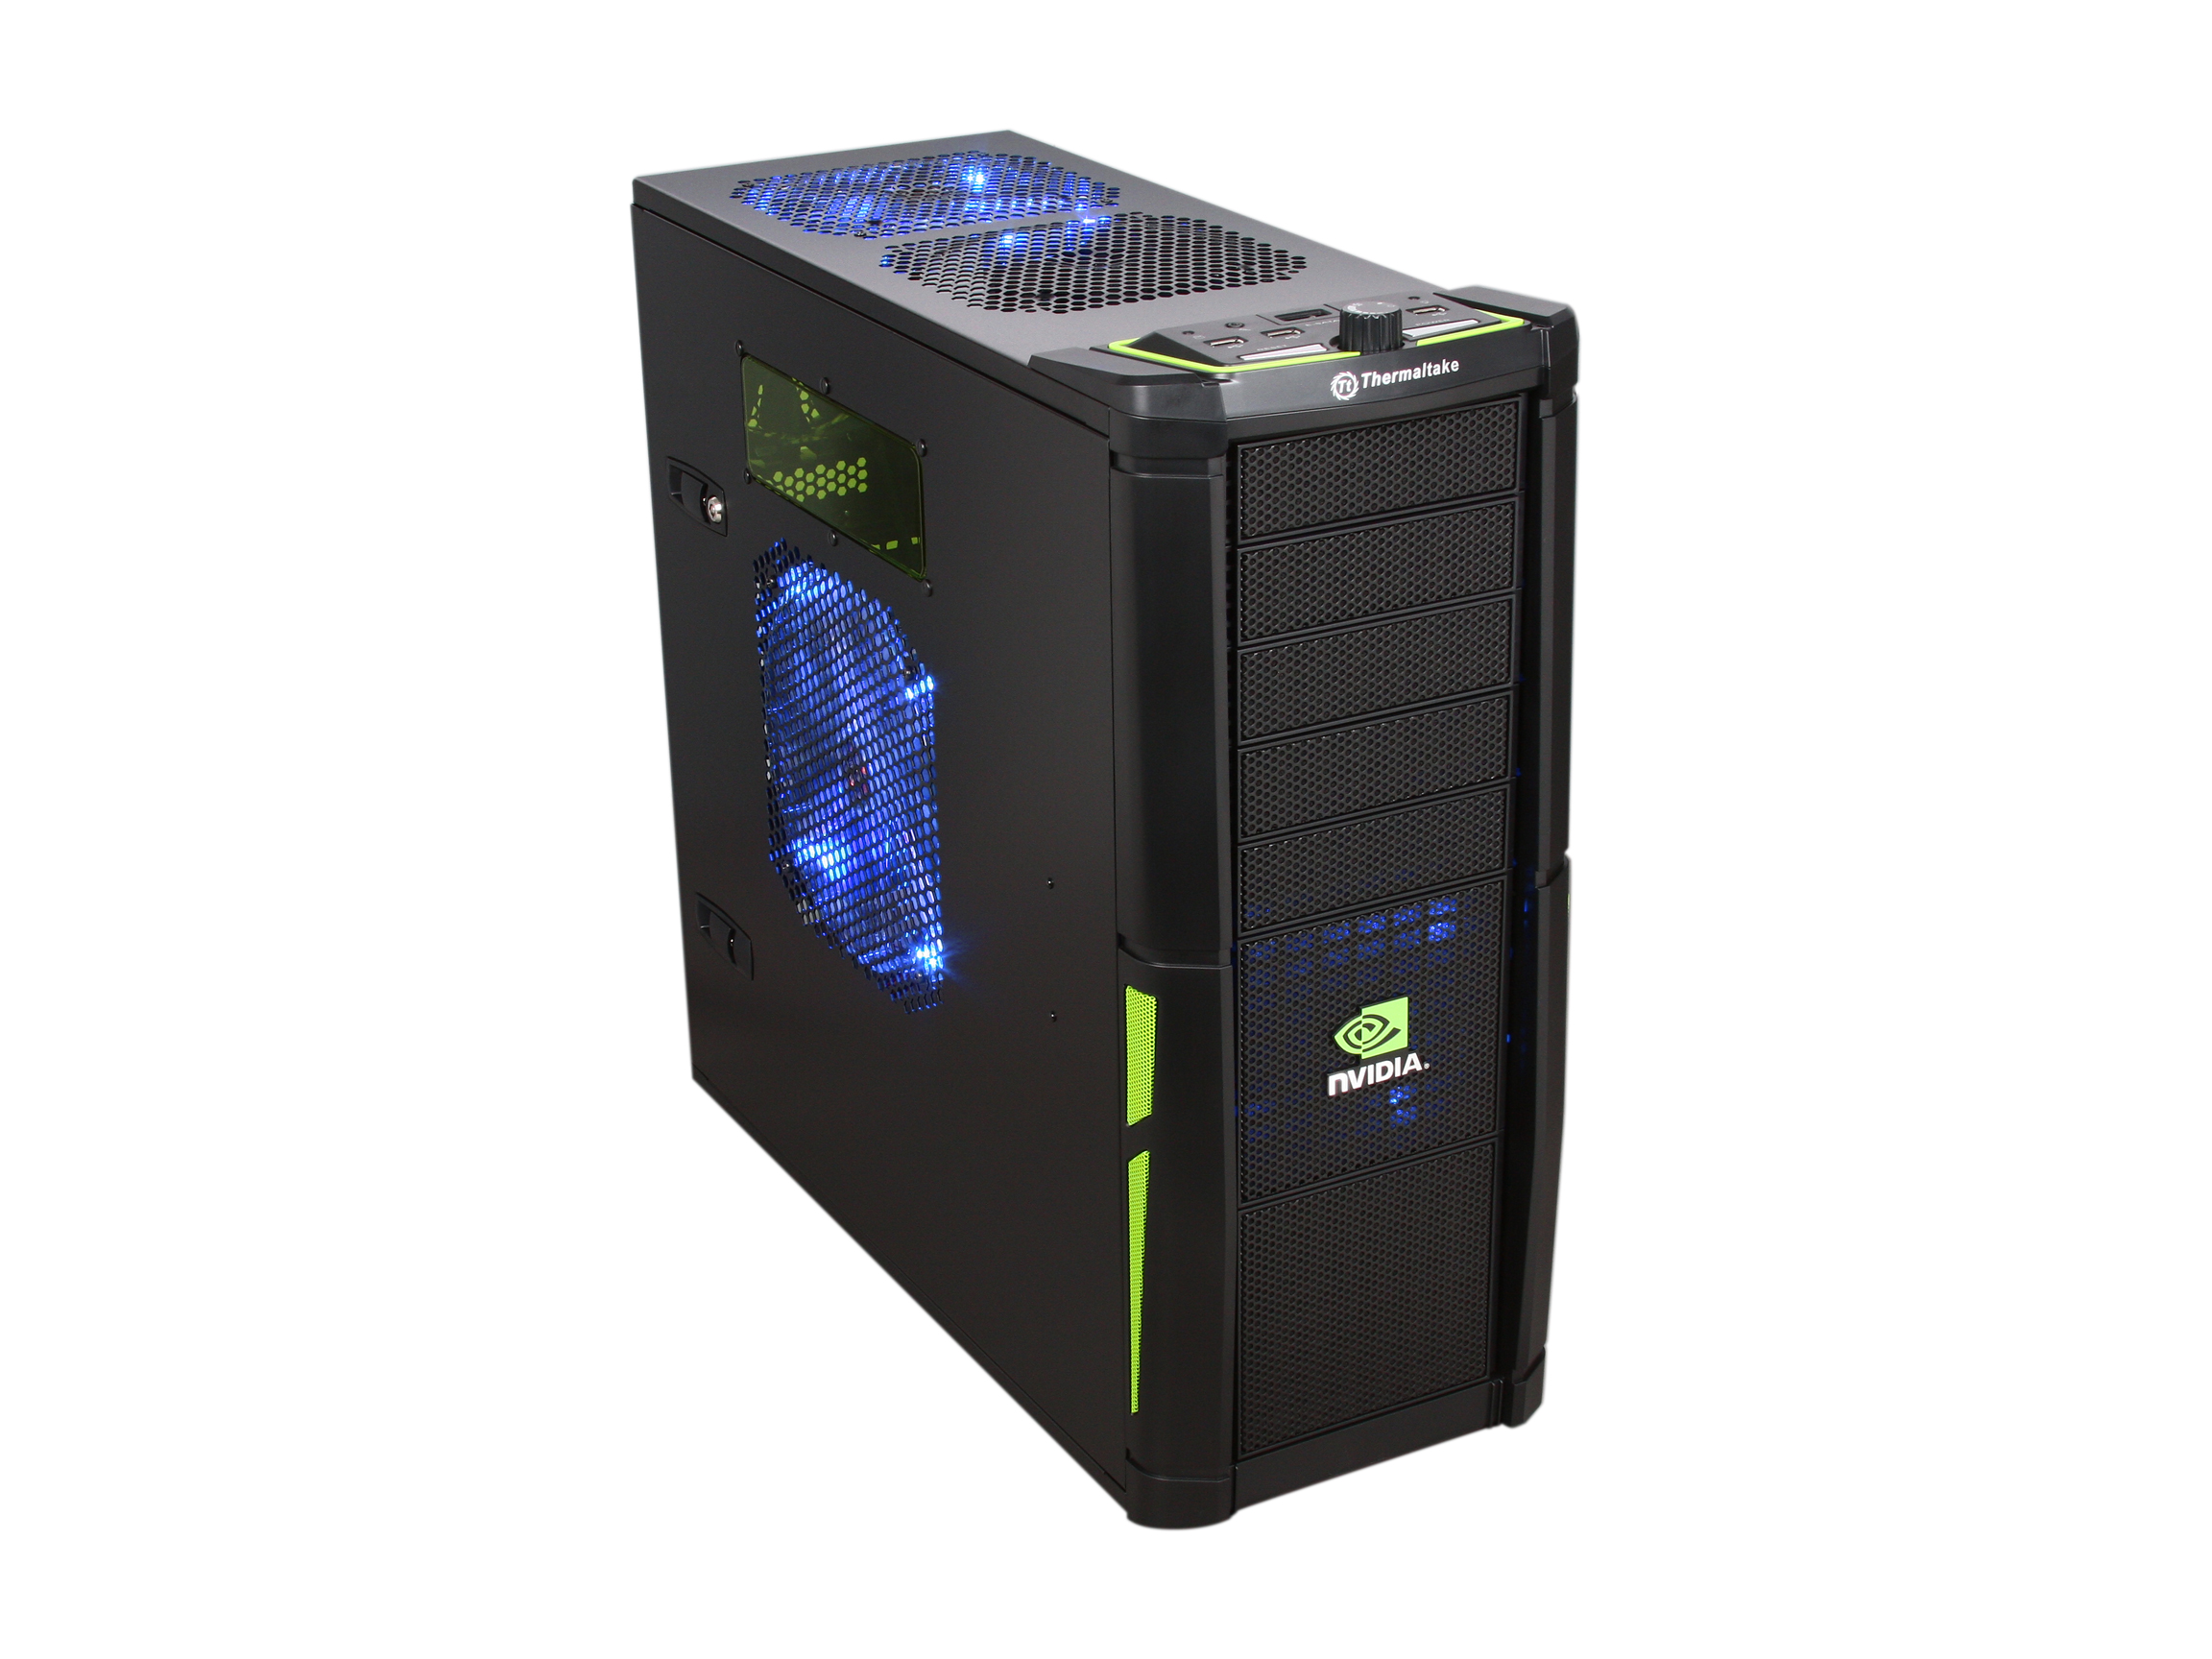 Thermaltake VL200L1W2Z NVIDIA Edition Black and Green Lining ATX Full Tower Gaming Computer Case w/ 2x 120mm Fan (Front & Rear), 1x Front Colorshift LED 120mm Fan, 1x Top Colorshift LED 200mm Fan, 1x Side Colorshift LED 230mm fan & 1x D